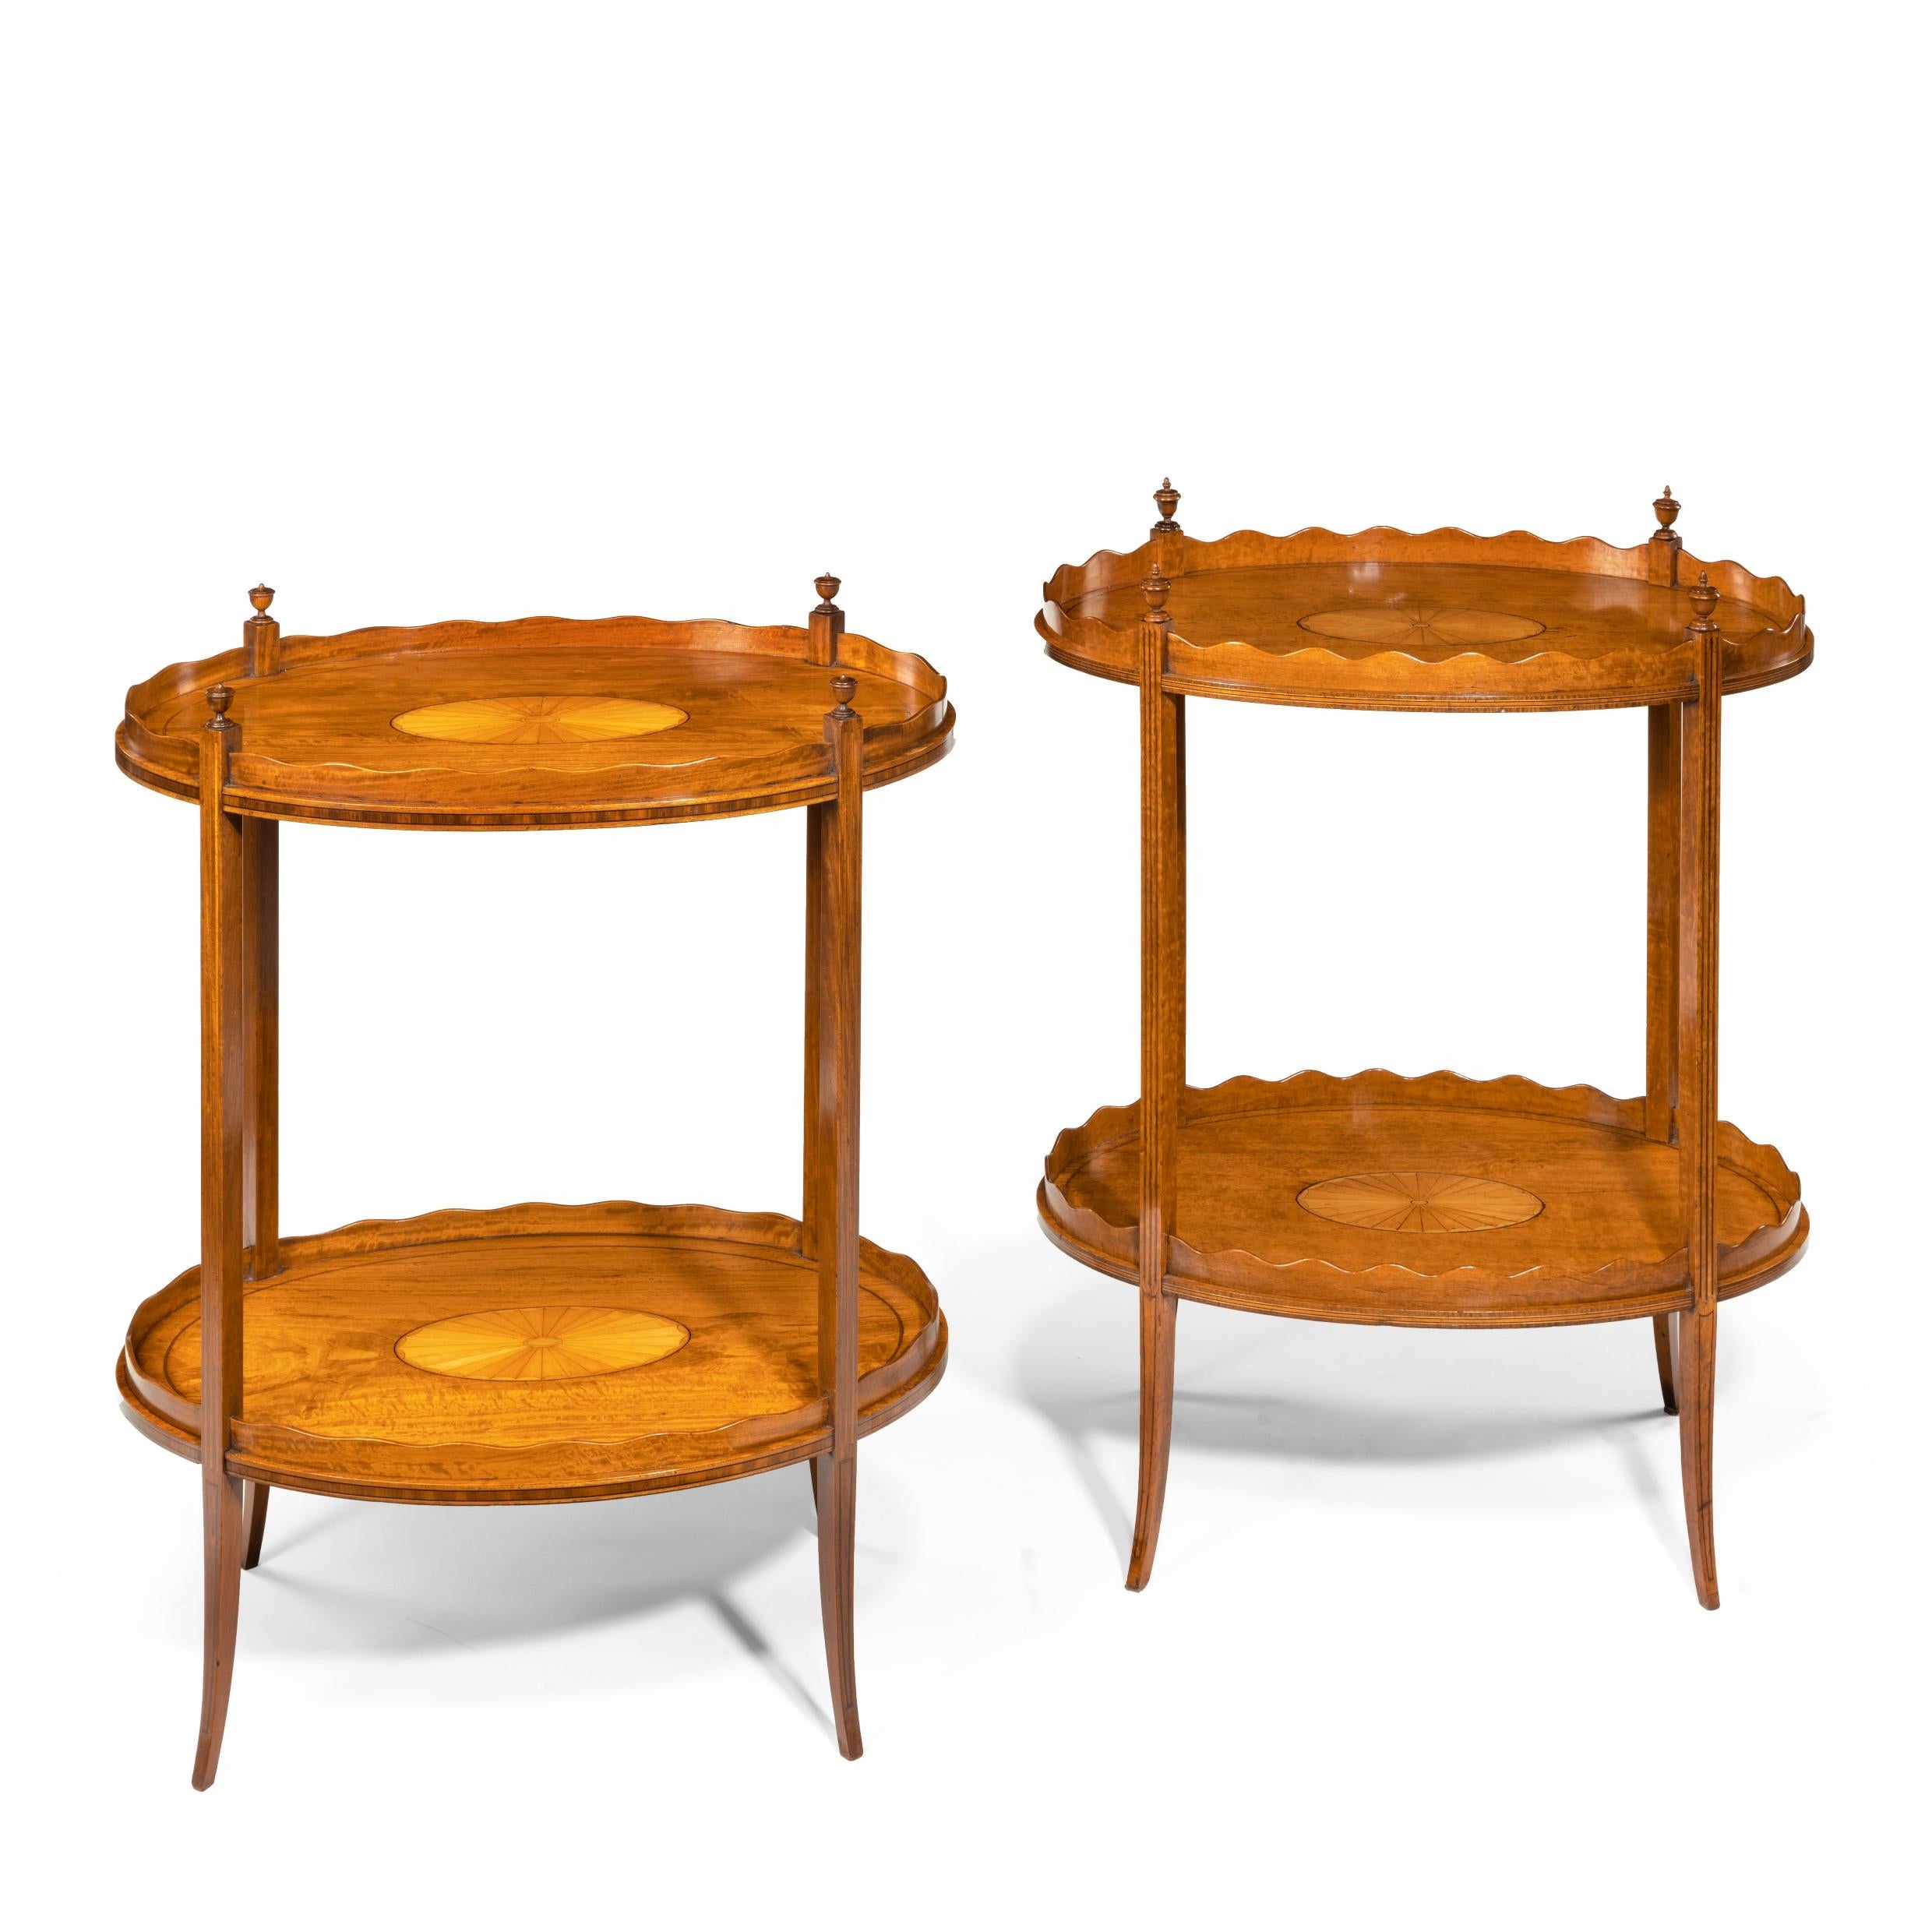 A matched pair of late Victorian satinwood tray tables, each of oval form with two tiers with solid undulating galleries, the slender square section legs surmounted by urn finials, decorated with flame veneers centered on a sunburst. English,